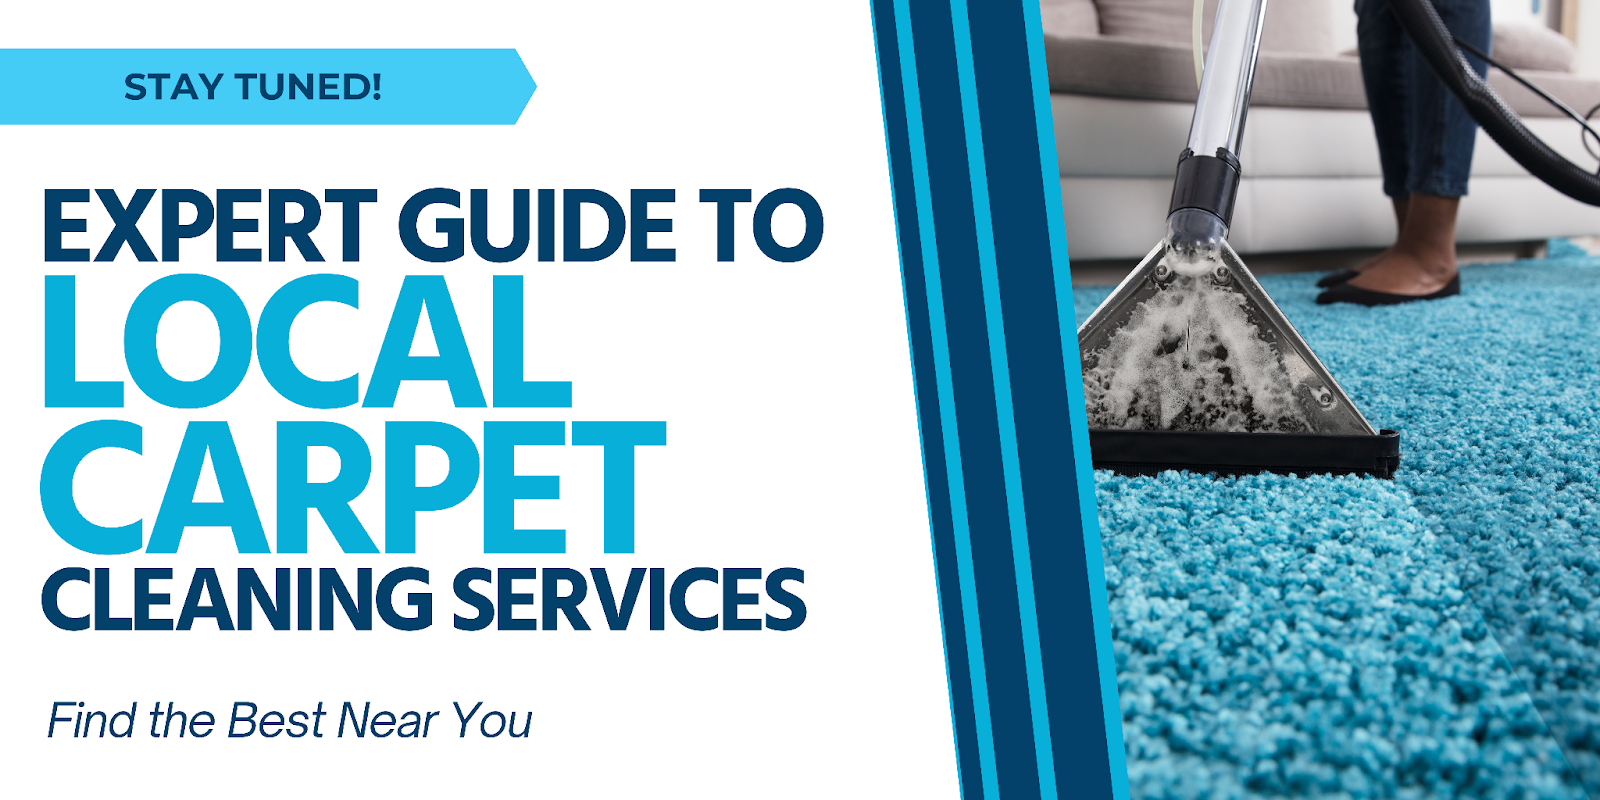 Expert Guide to Local Carpet Cleaning Services